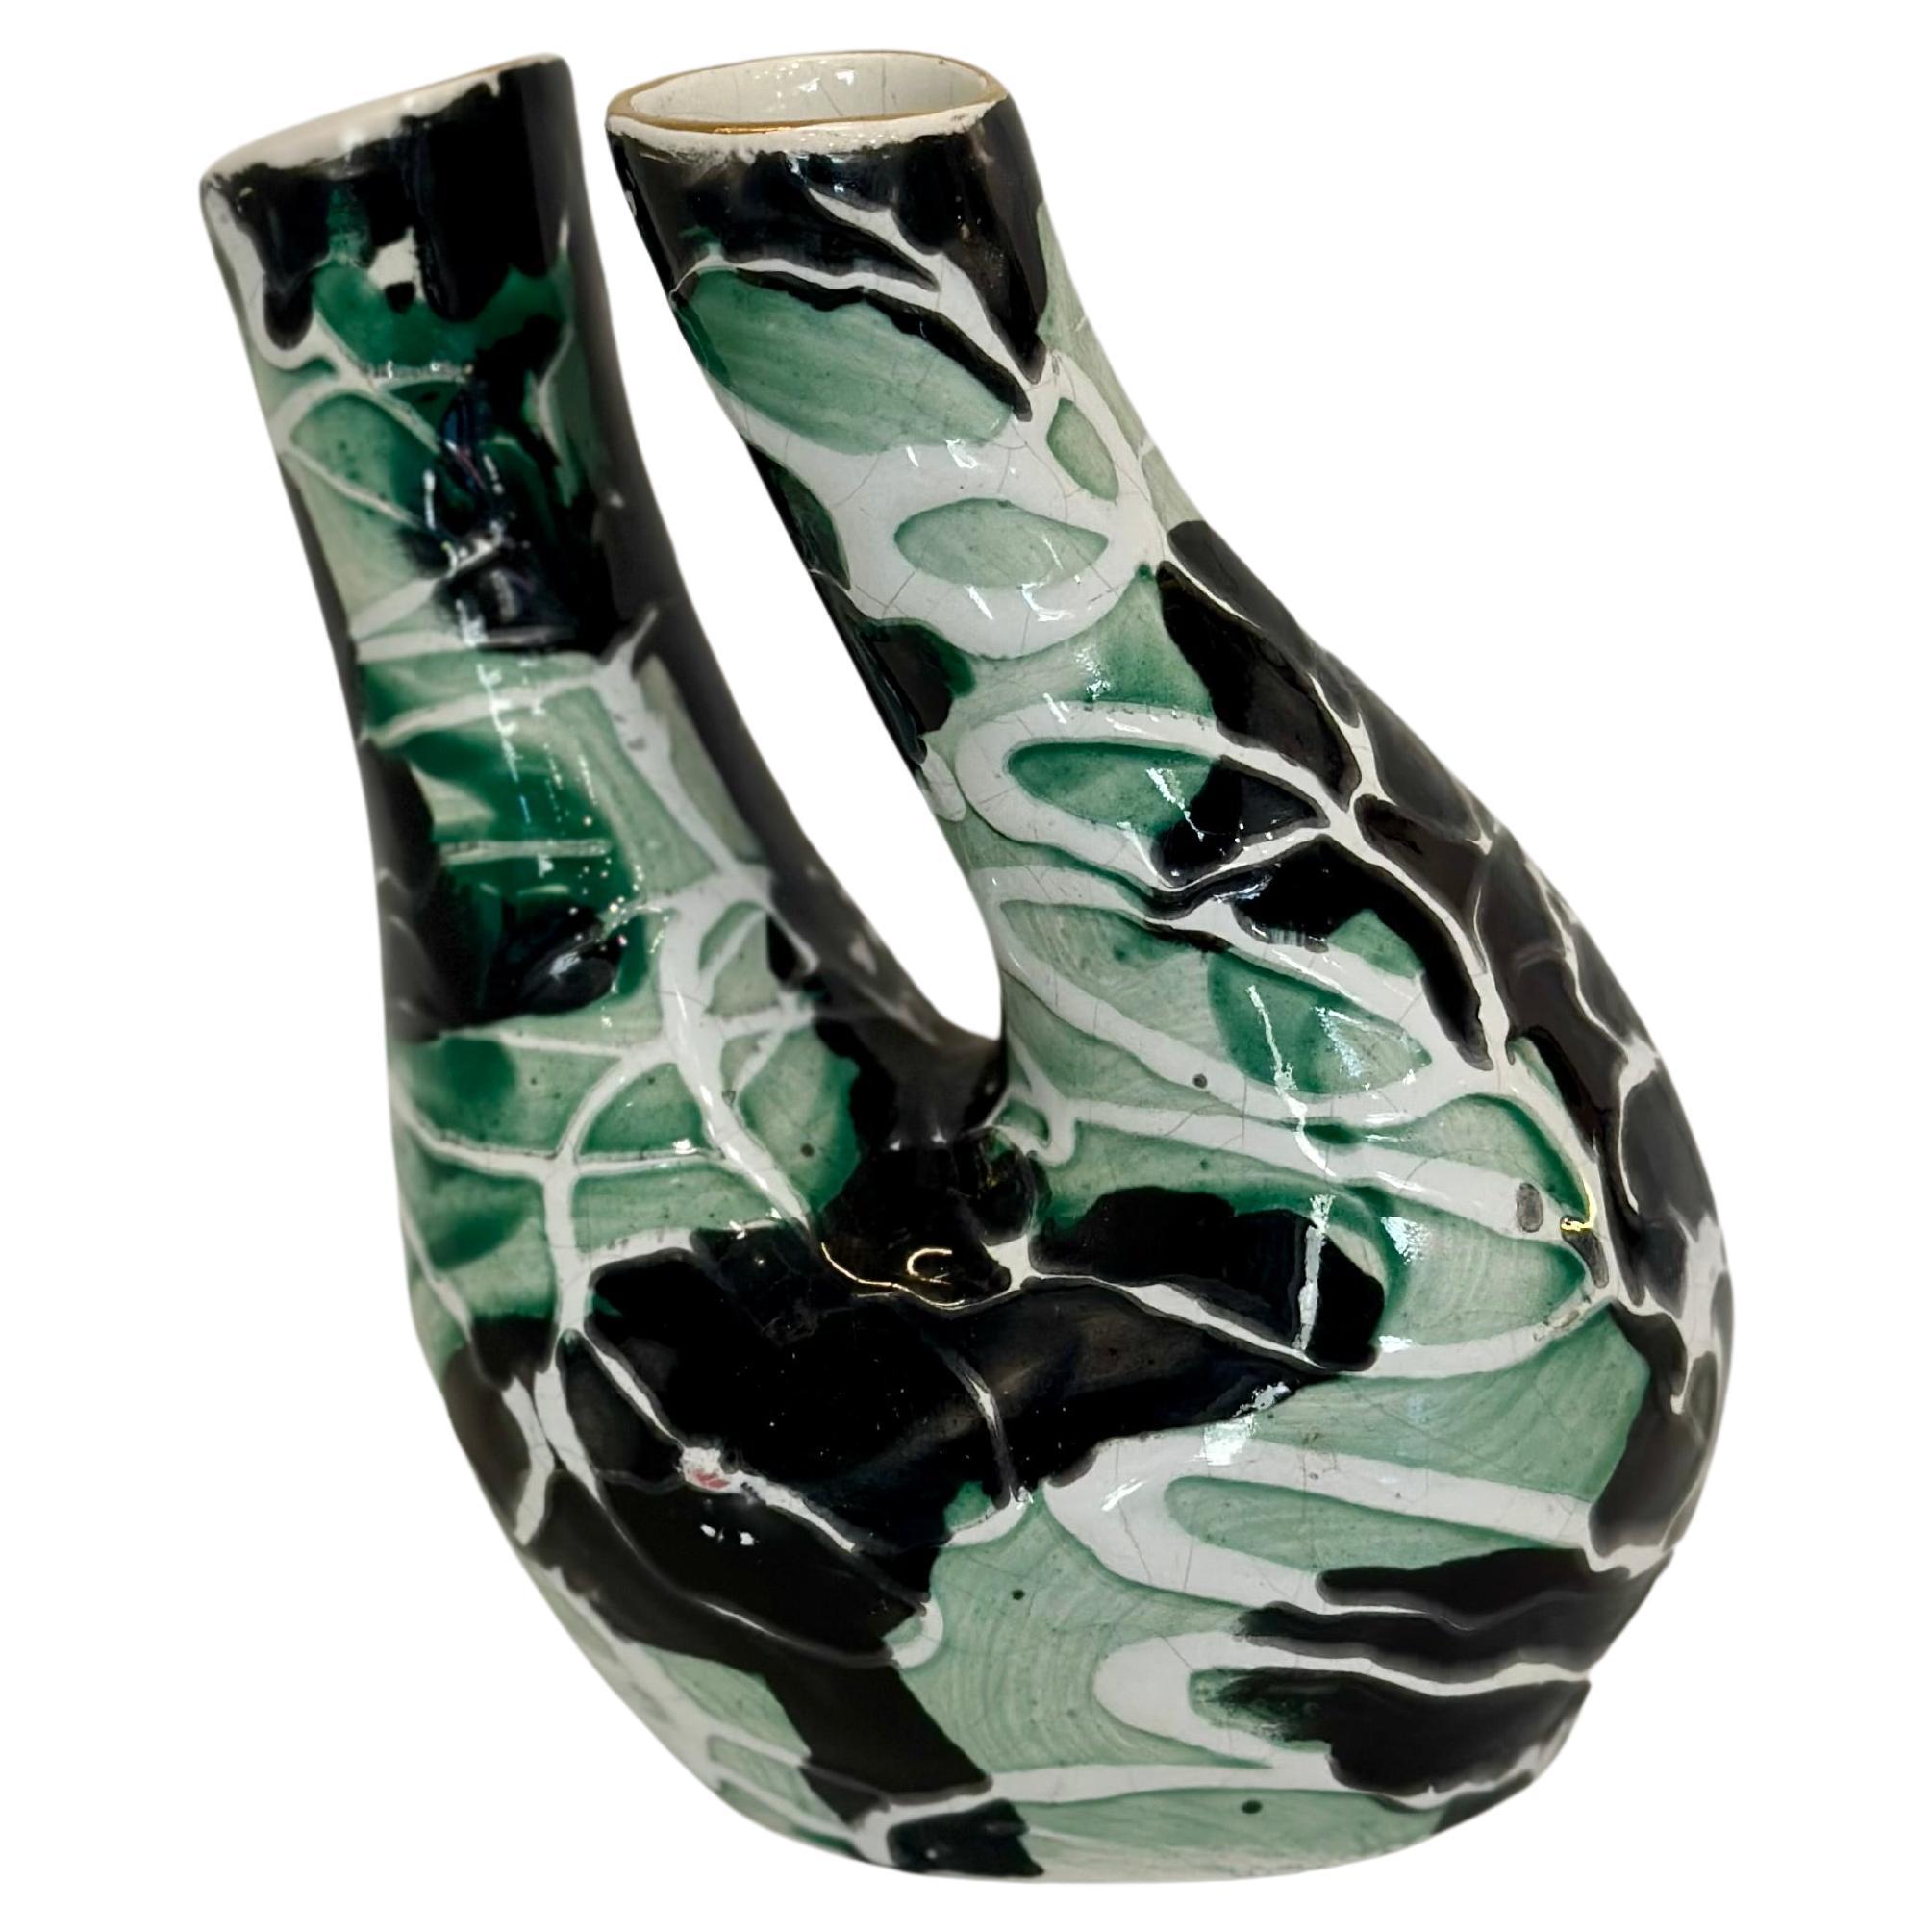 This modern Brazilian ceramic vase dates from about 1950. Made from glazed ceramic in shades of green, black and white, it measures 18.5 cm high, 15 cm wide and 12 cm deep.

The use of enamelled ceramic creates a smooth and shiny surface that